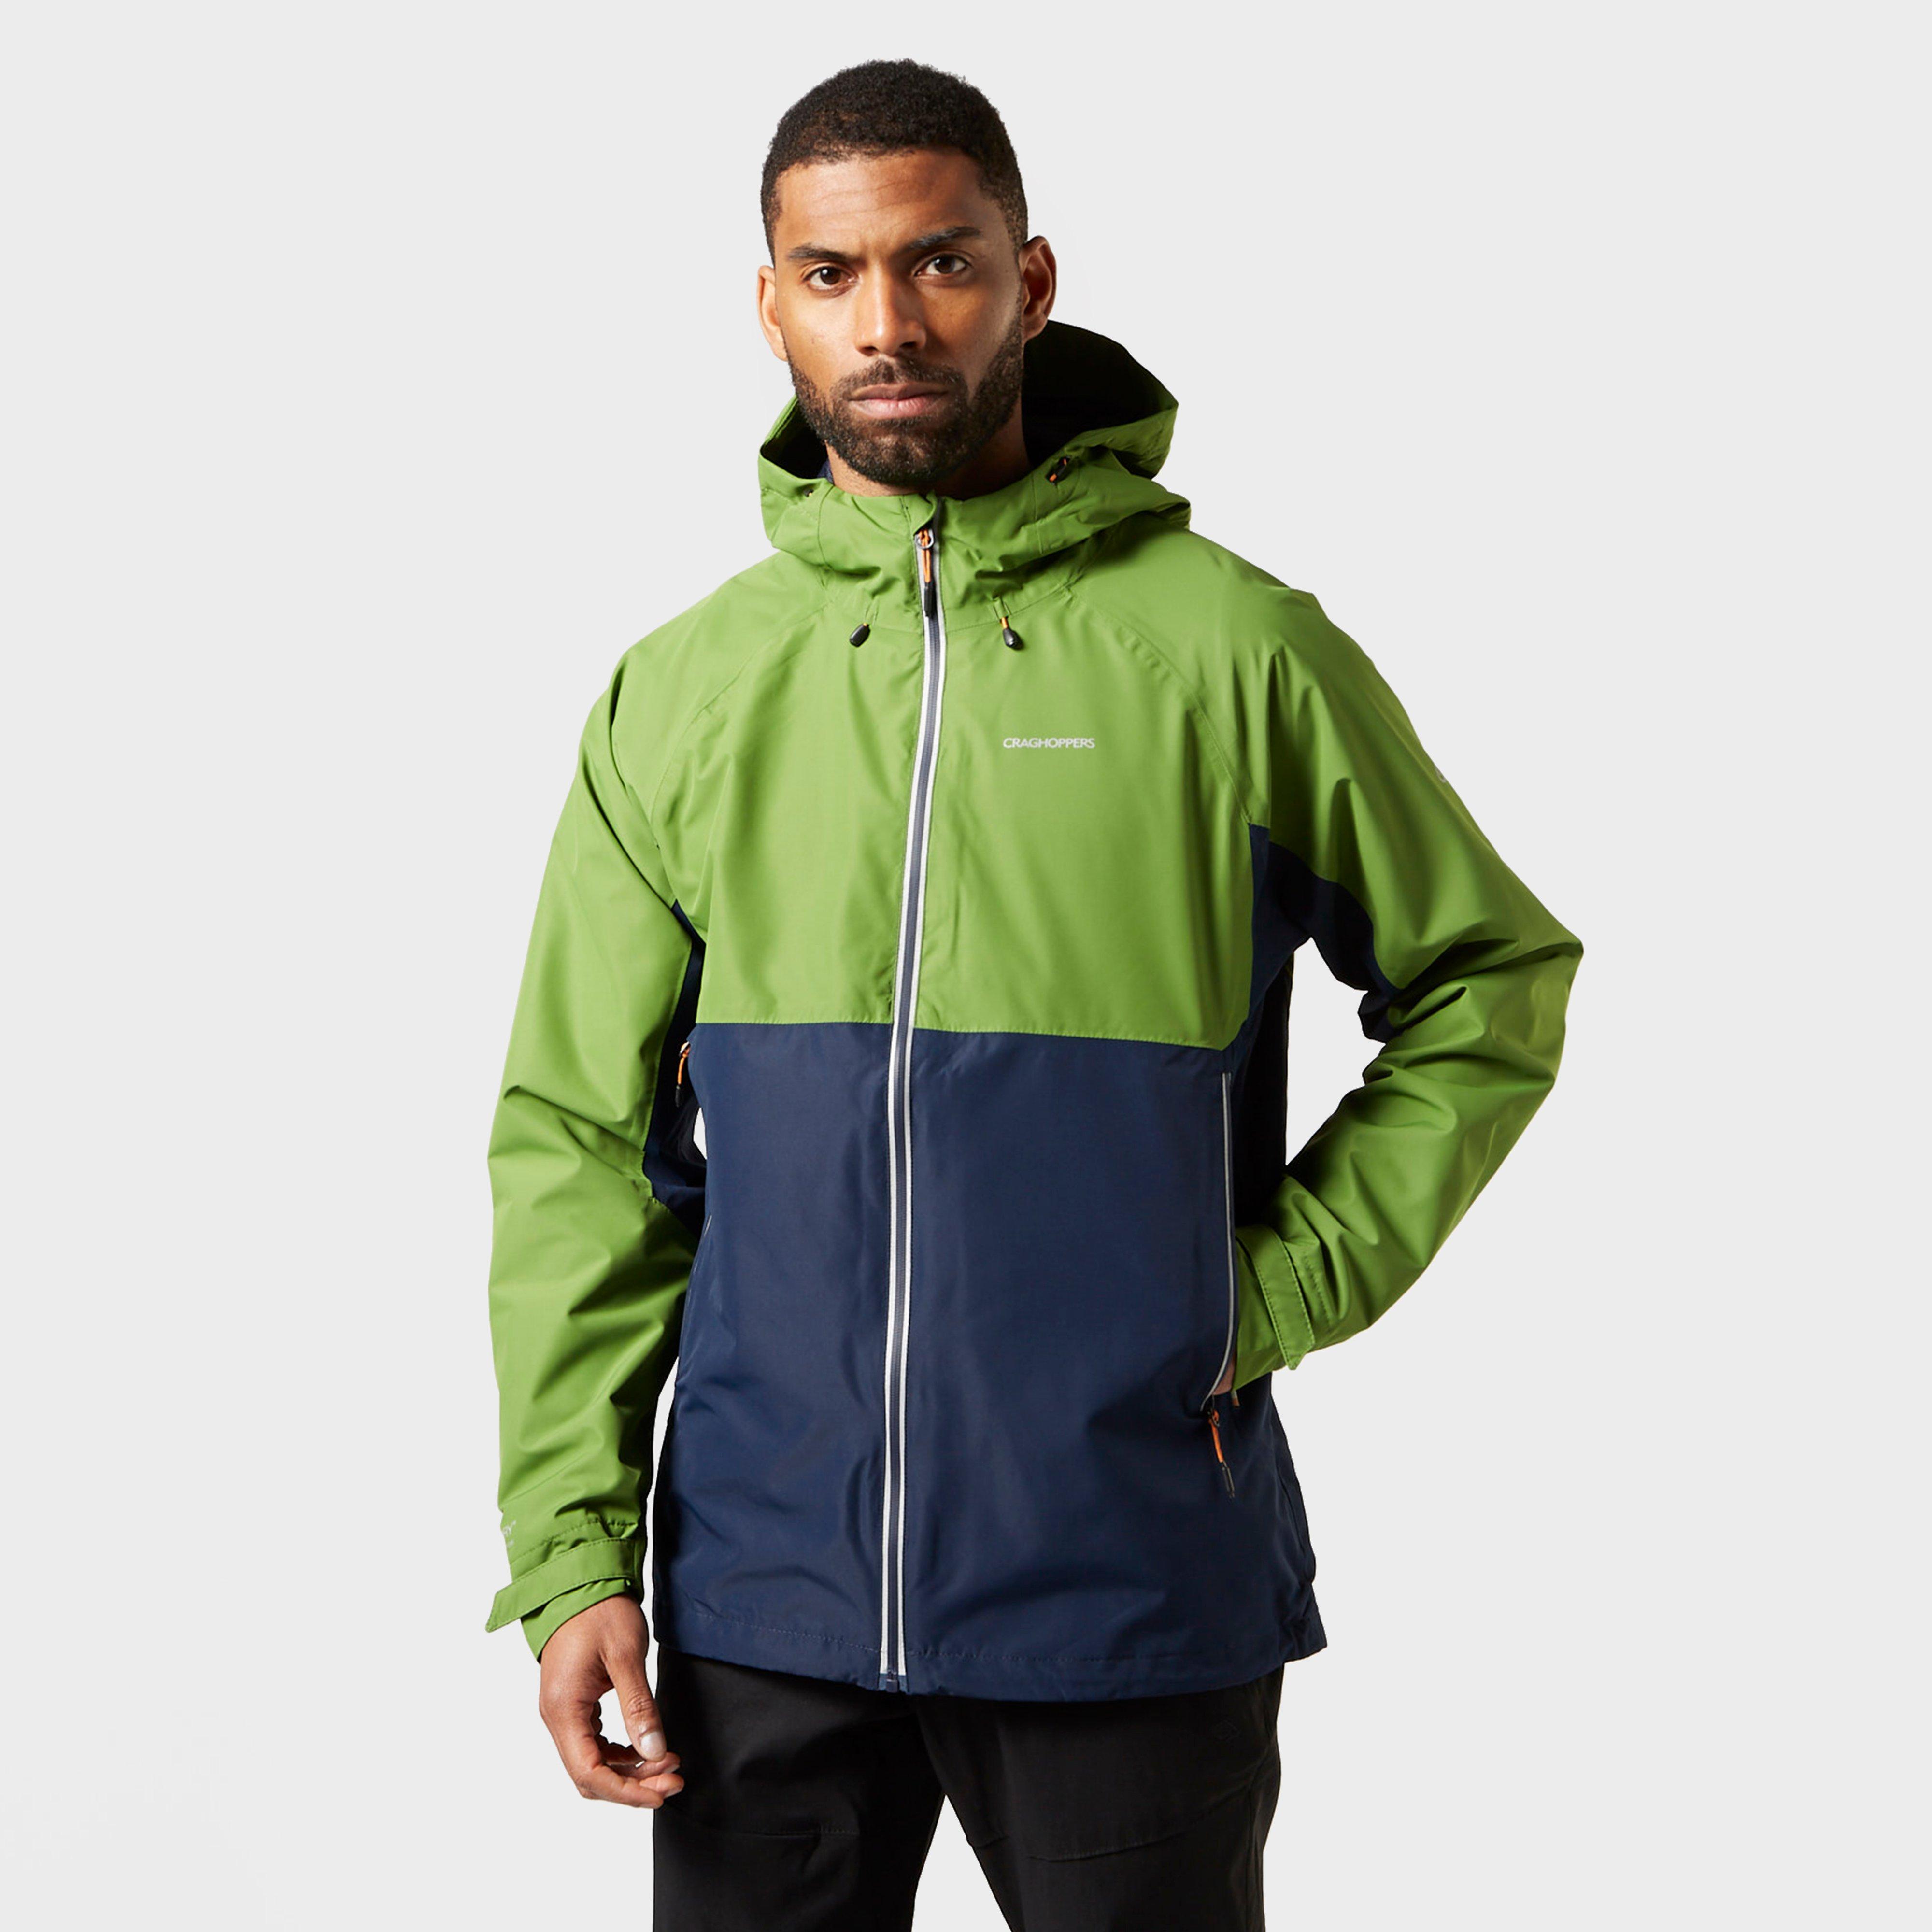 Product brands craghoppers | jacketcompare.co.uk